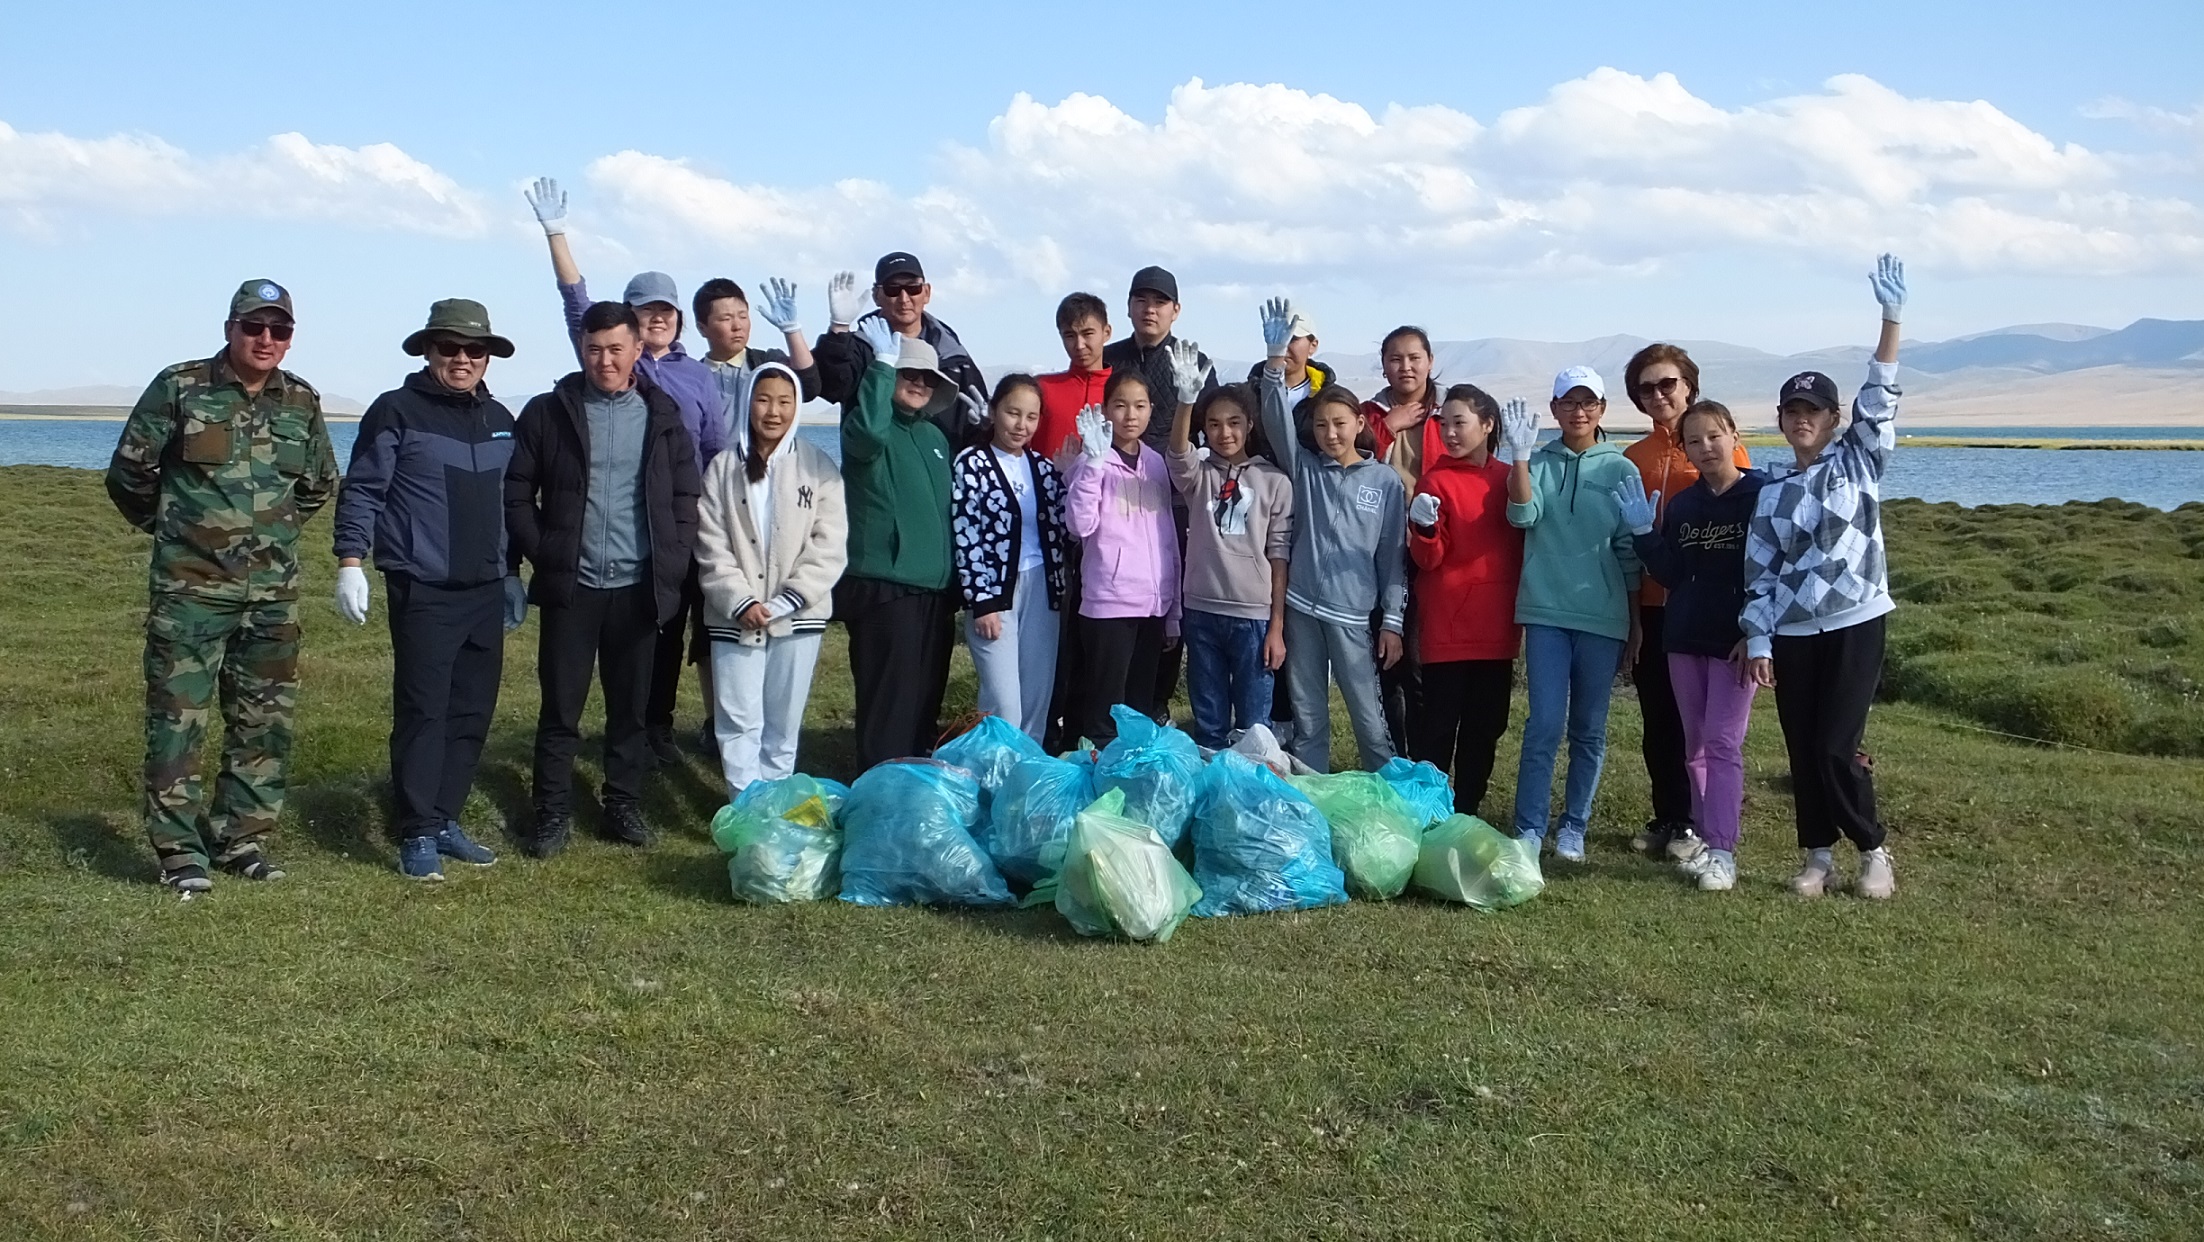 The Kyrgyz Republic develops local cooperation to preserve ecosystems